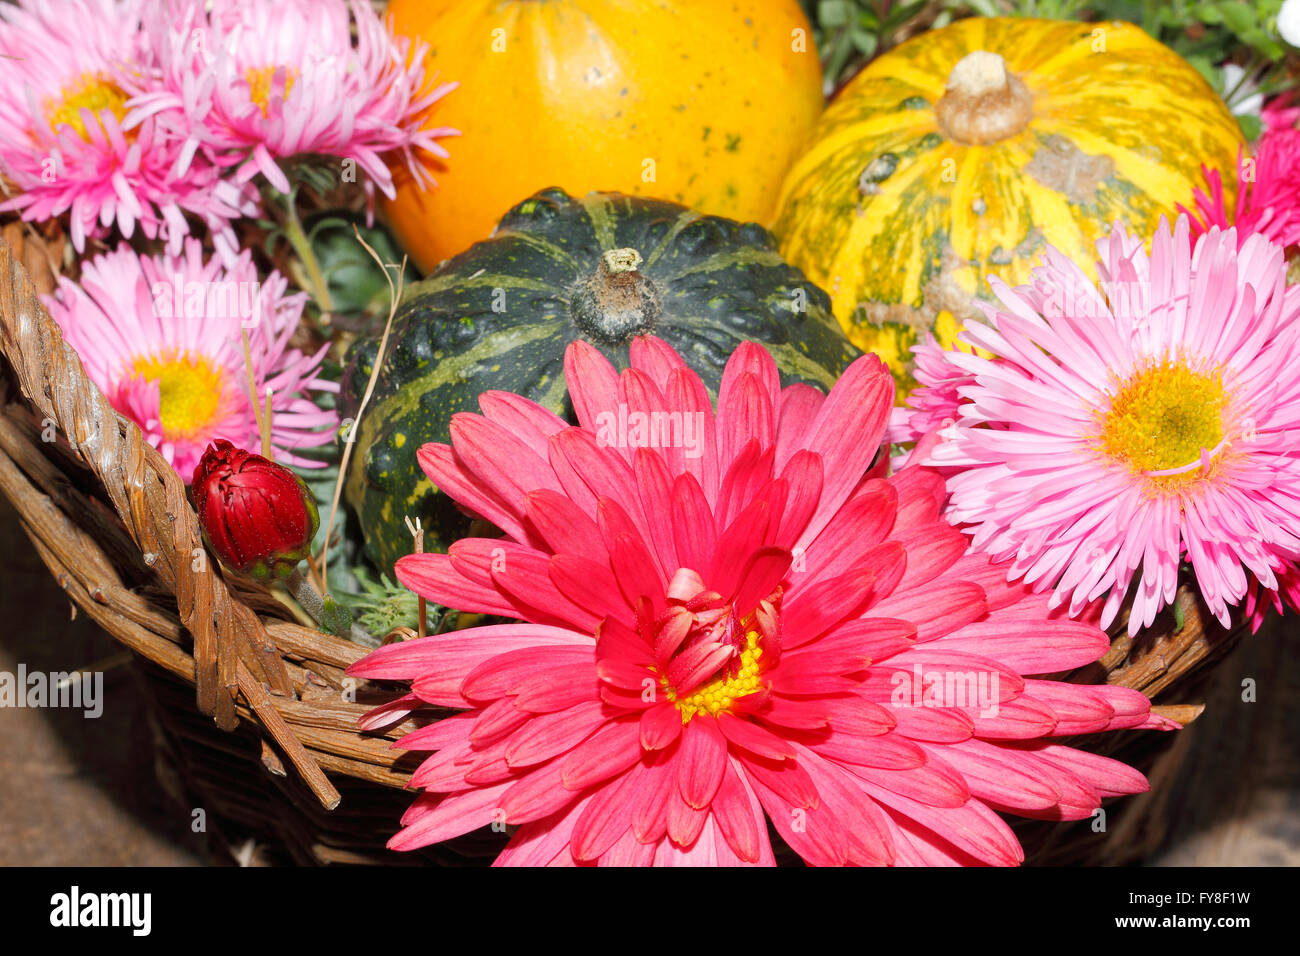 Flowers various garden flowers and ornamental gourds in a basket, table setting, place setting on a table Flowers, Thanksgiving Stock Photo